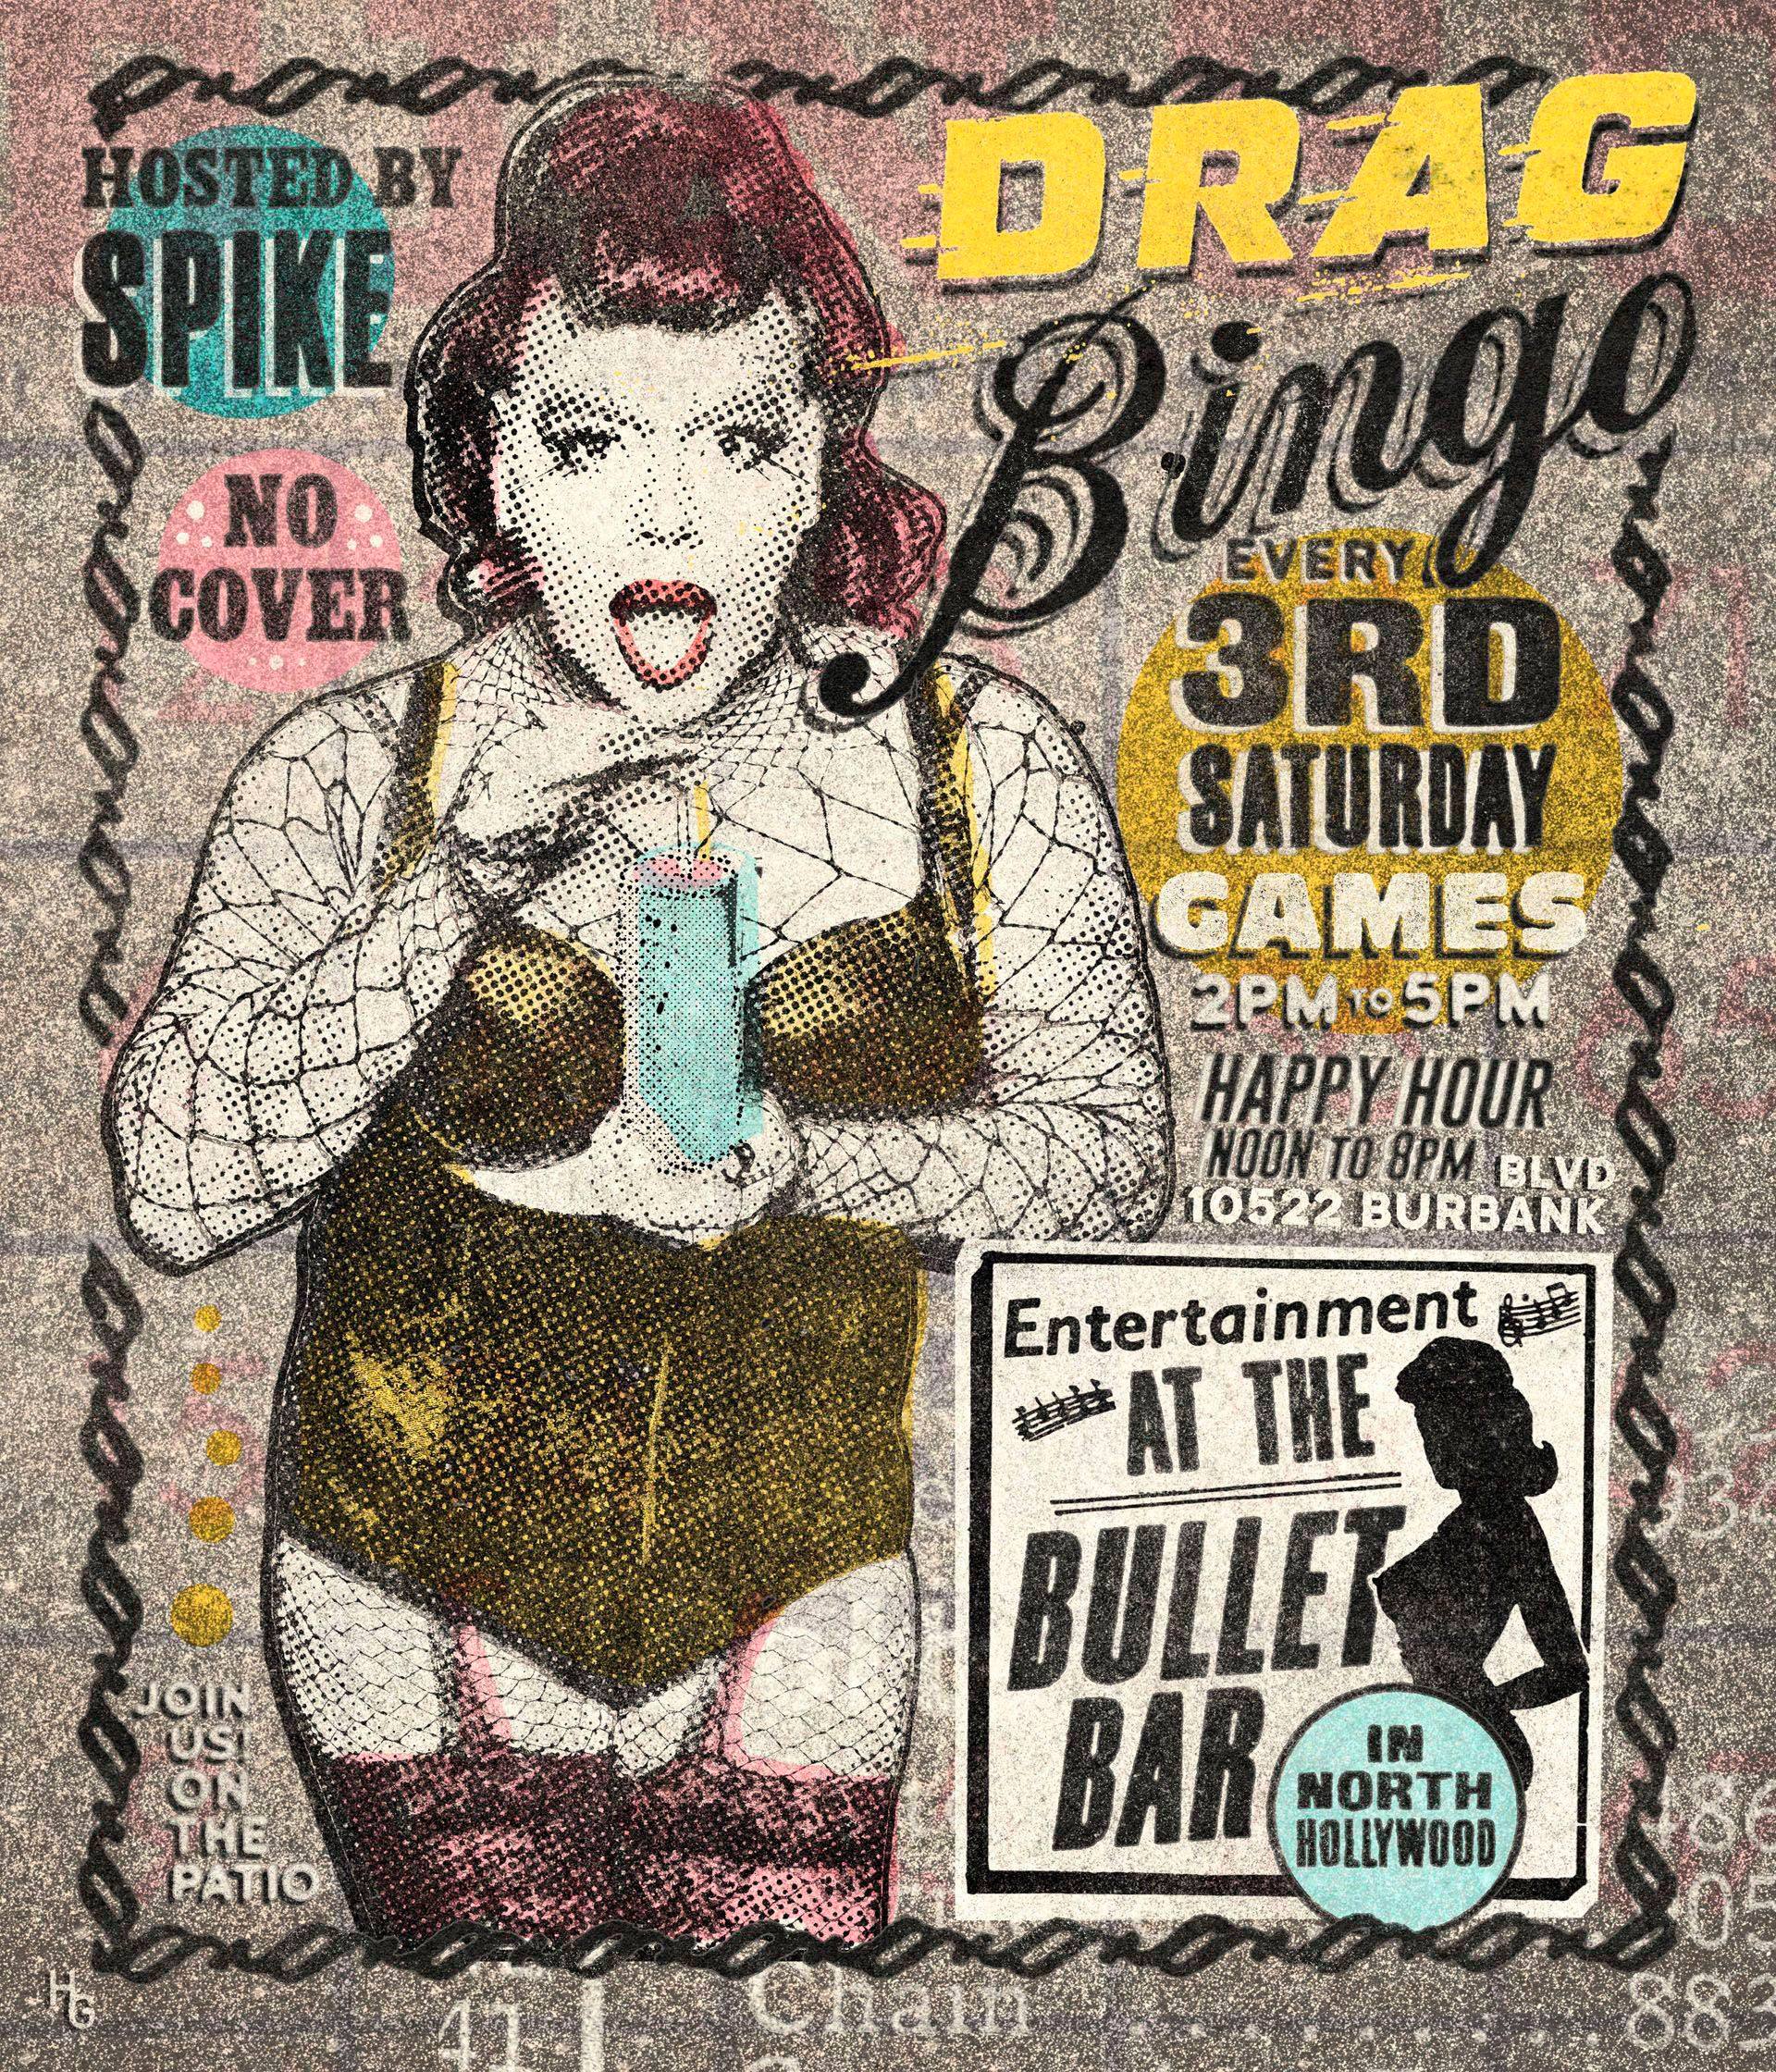 THE BULLET BAR Presents DRAG BINGO Hosted by SPIKE: Every third Saturday, from 2:00 PM to 5:00 PM! No cover.